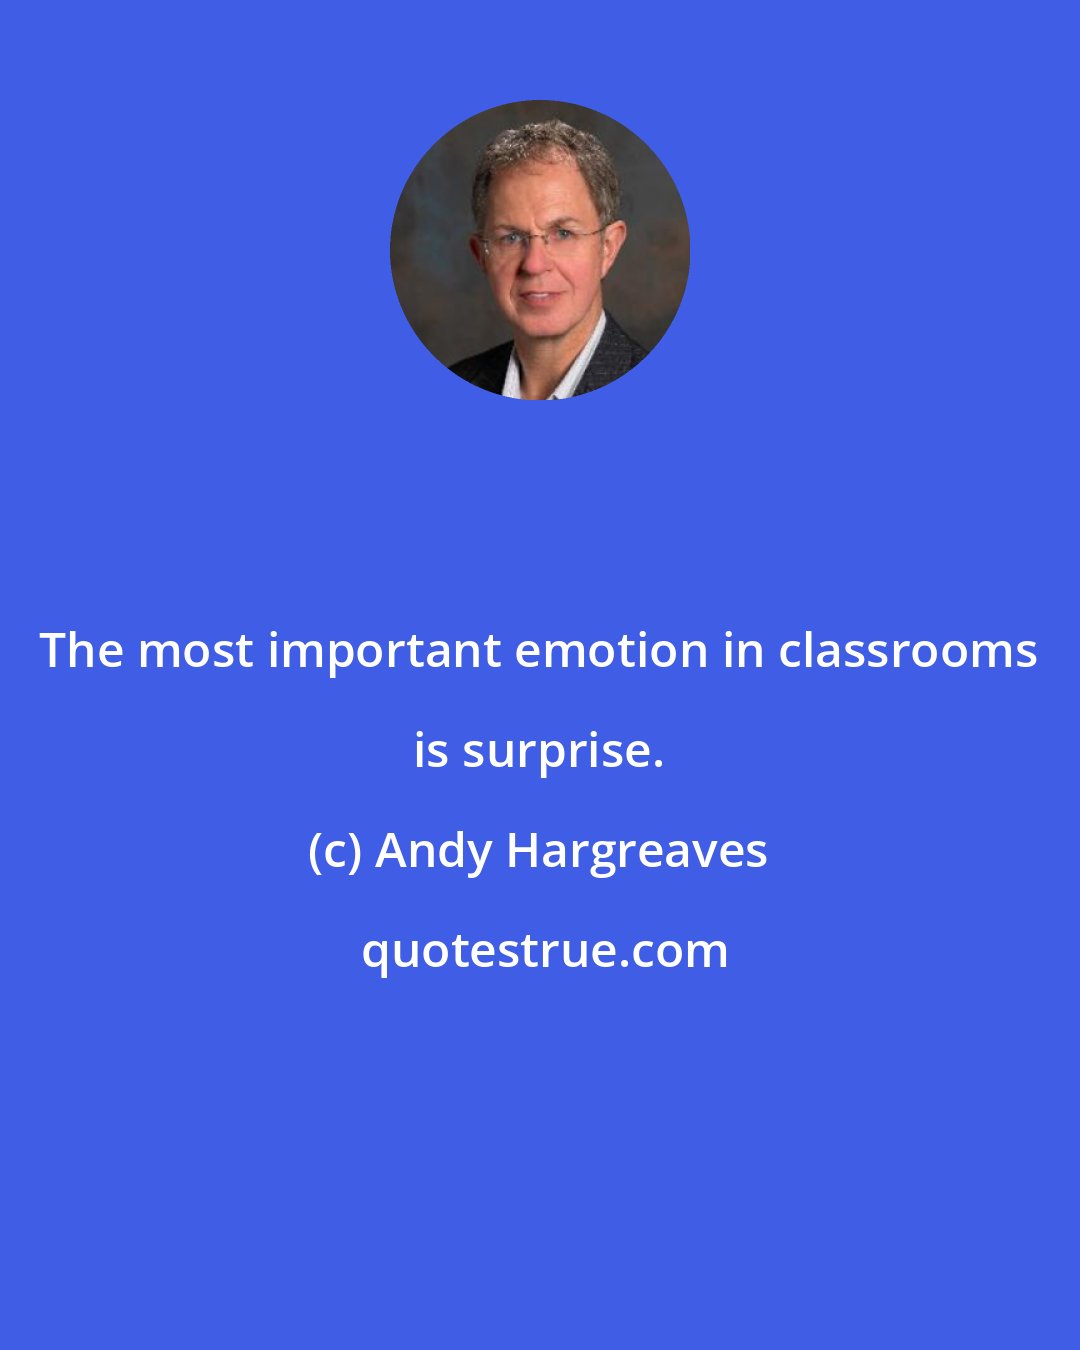 Andy Hargreaves: The most important emotion in classrooms is surprise.